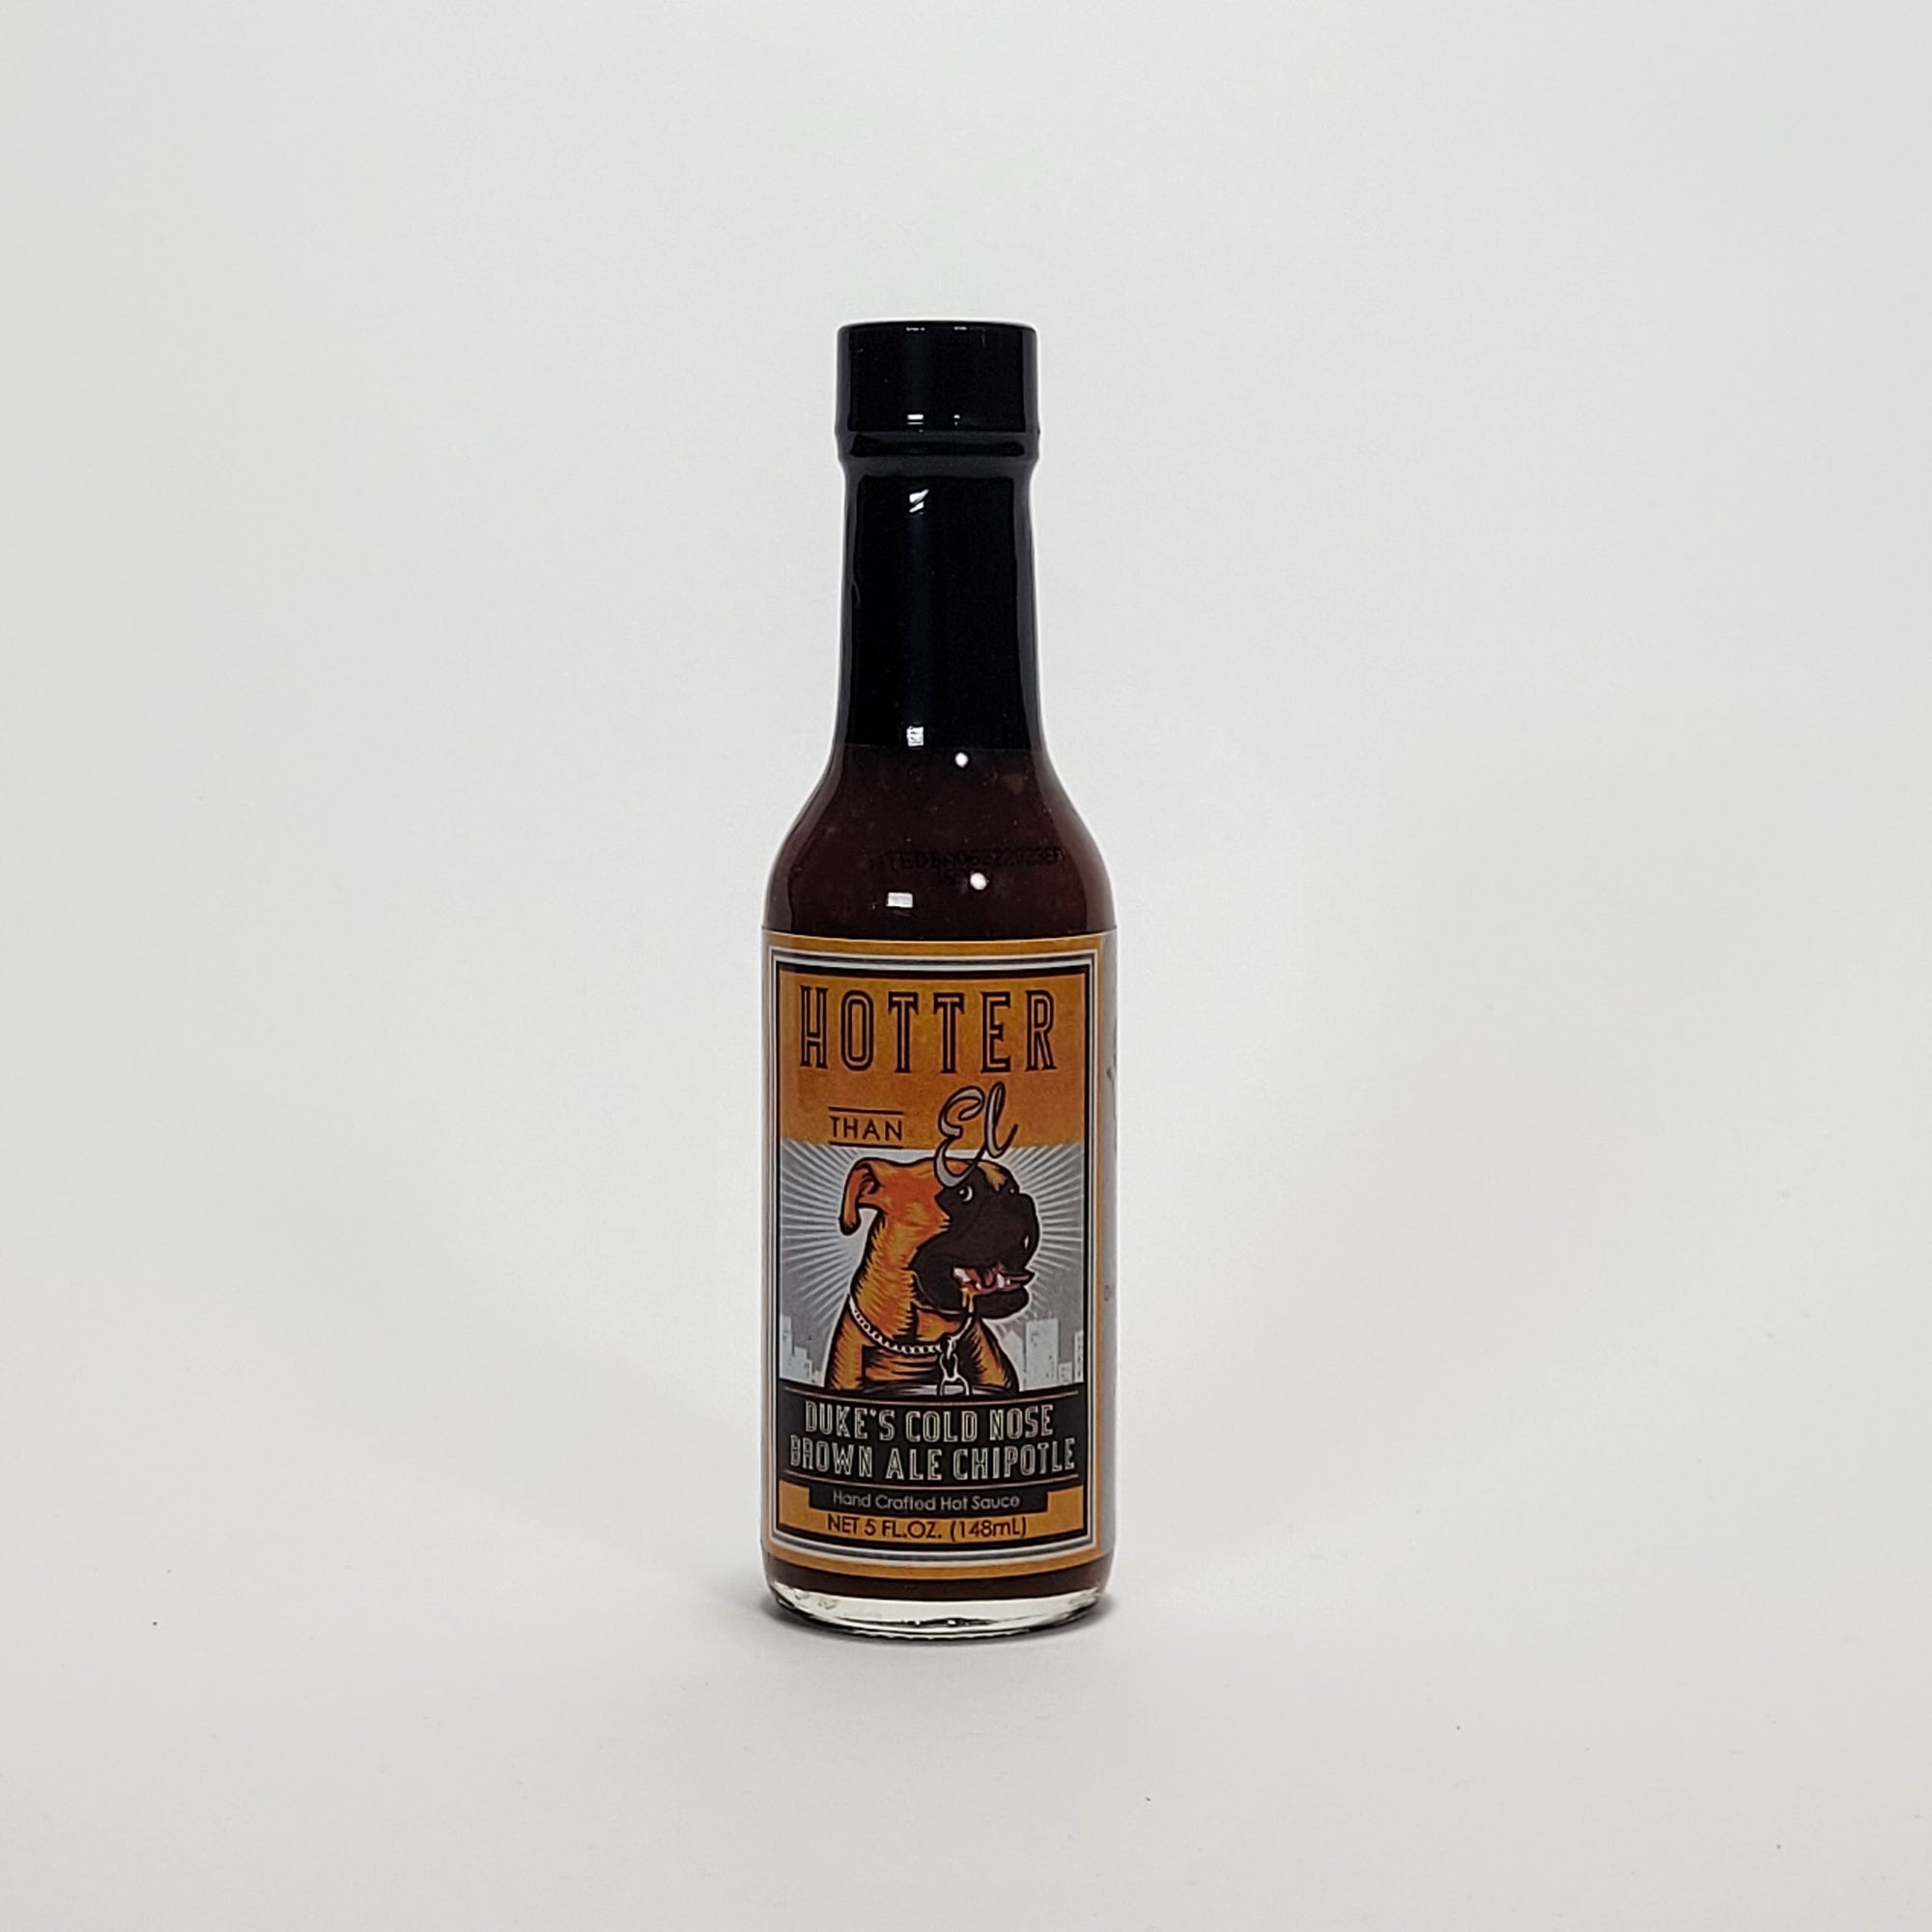 Hotter Than El Duke's Cold Nose Brown Ale Chipotle hot sauce